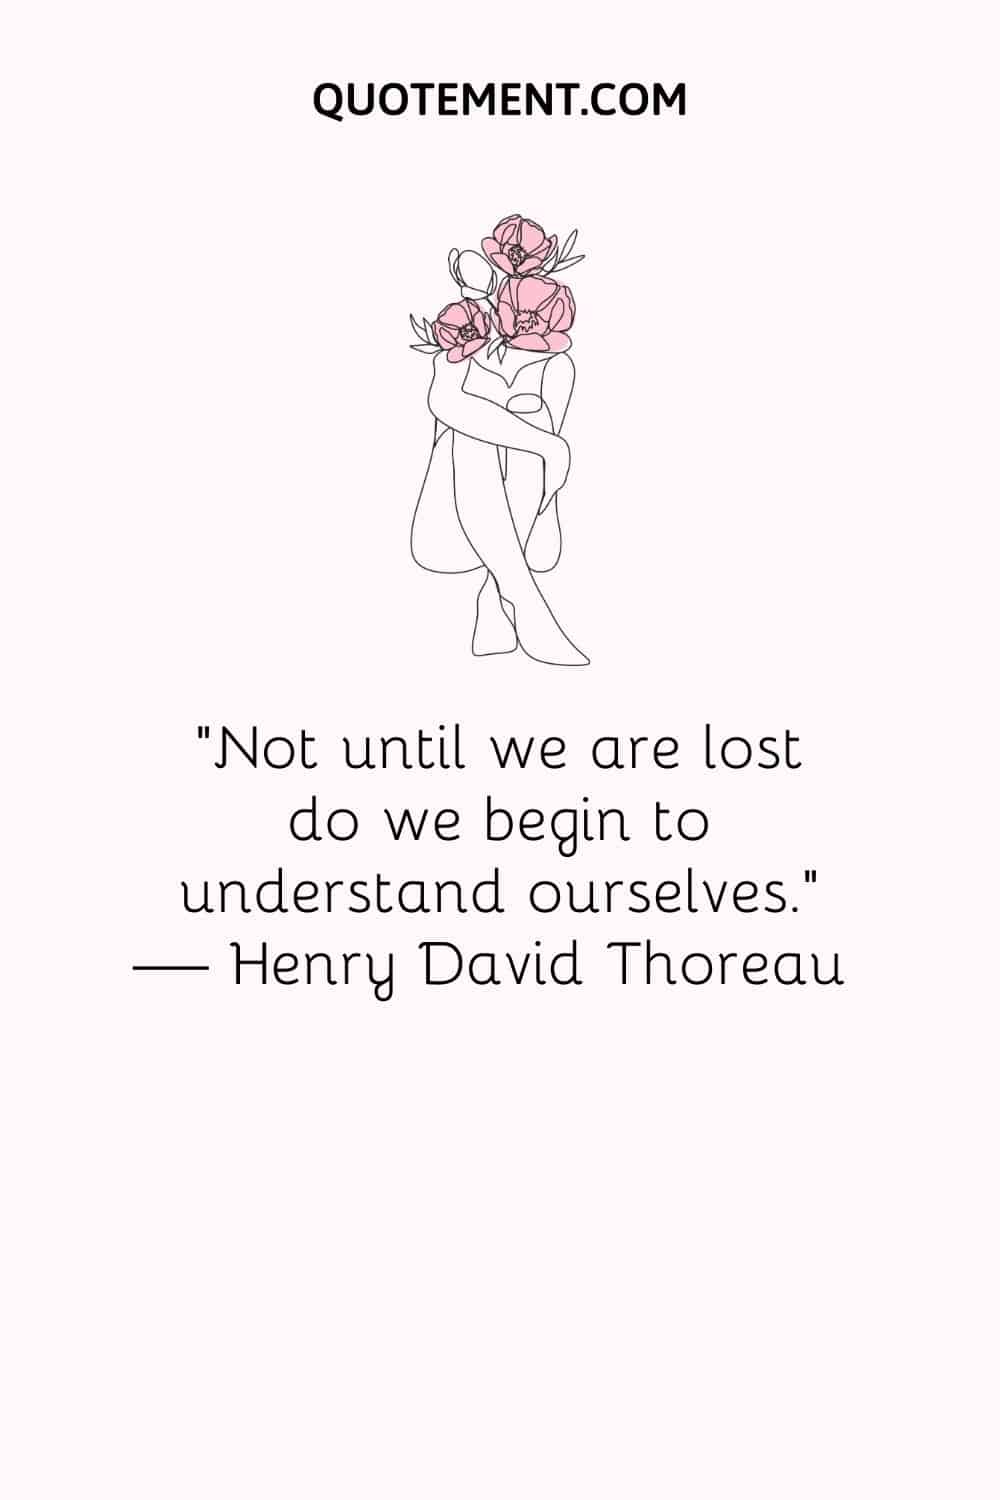 Not until we are lost do we begin to understand ourselves.